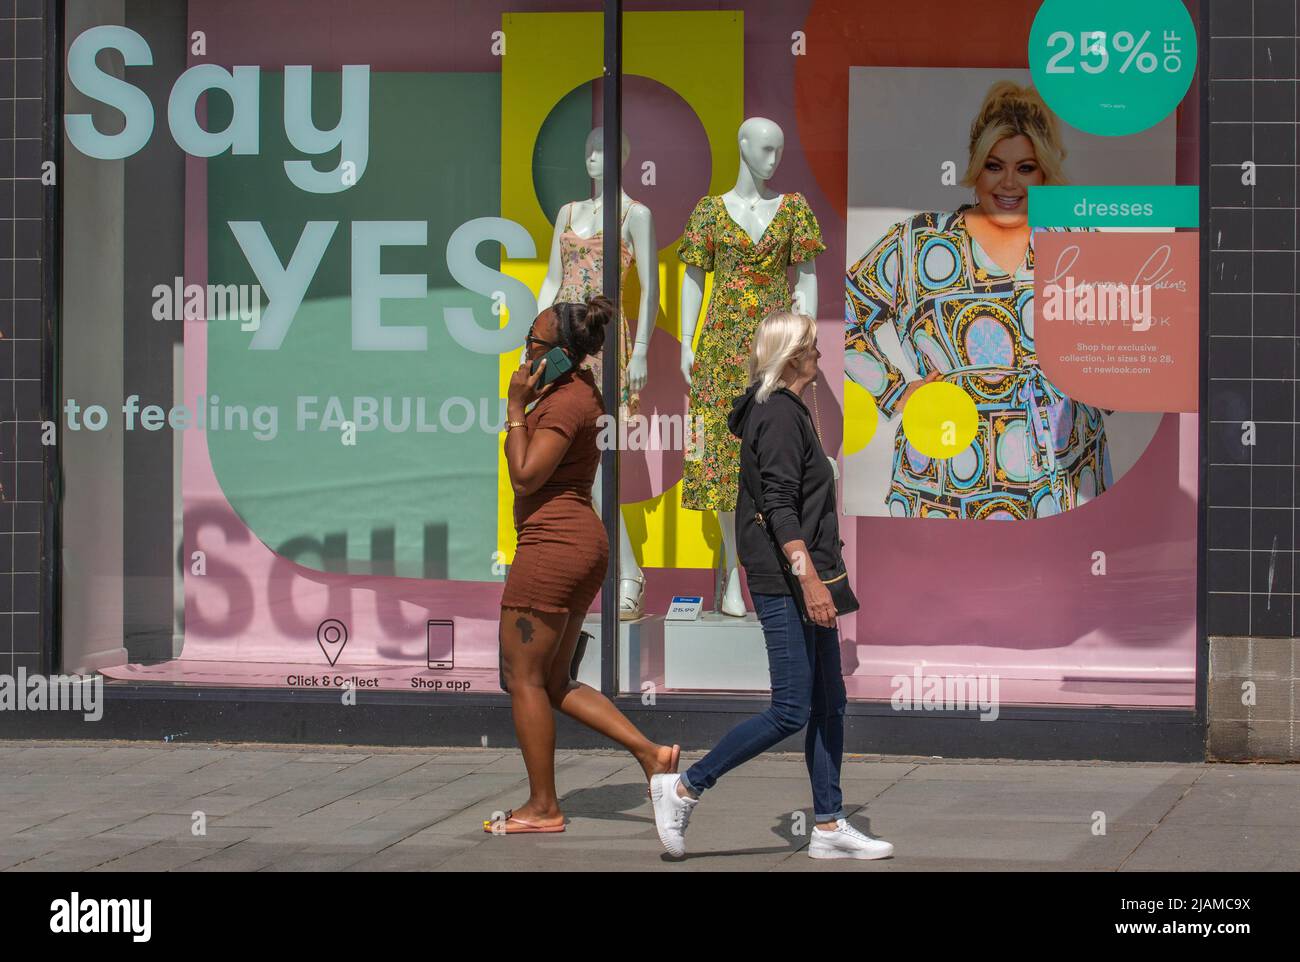 Southport, Merseyside.  Uk Weather.  31 May 2022. Shops, shoppers, shopping with a sunny start to the day in the north-west coastal resort. Temperatures are expected to rise with the prospect of a fine bright holiday Jubilee celebration weekend.  Credit; MediaWorldImages/AlamyLiveNews Stock Photo